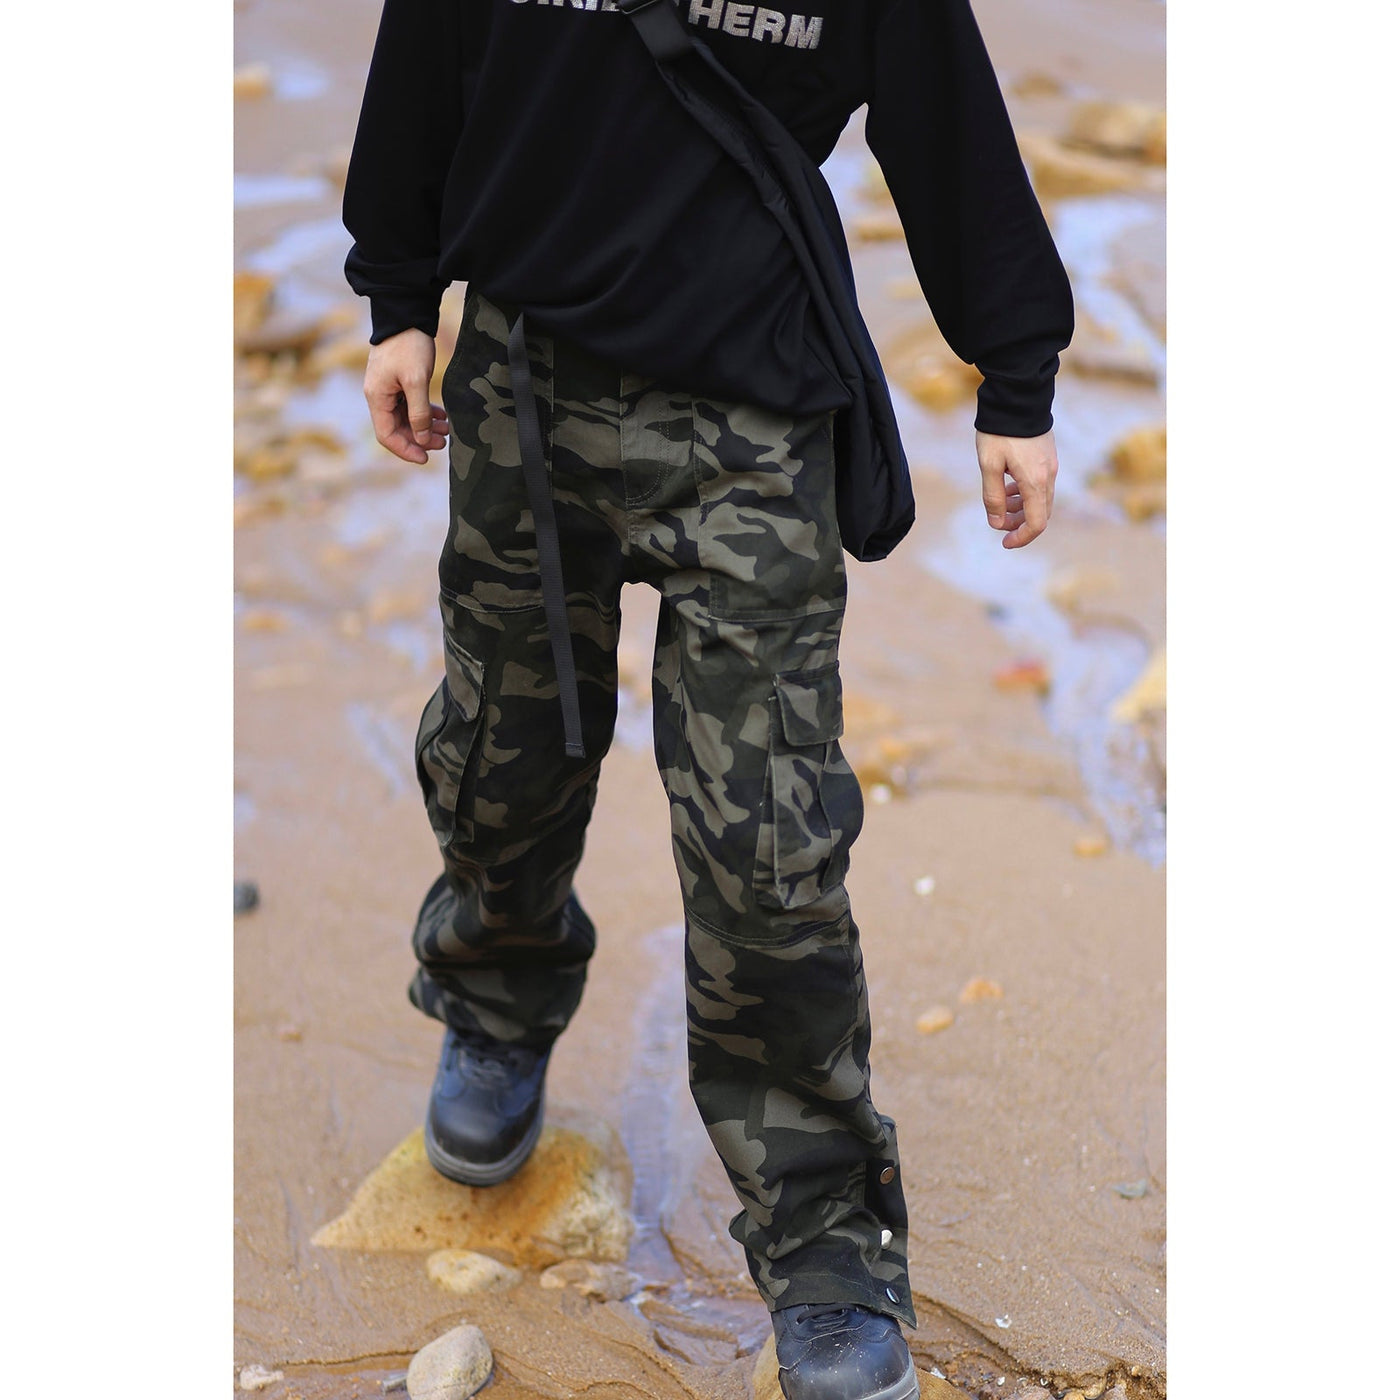 Muted Camouflage Pants Korean Street Fashion Pants By Poikilotherm Shop Online at OH Vault